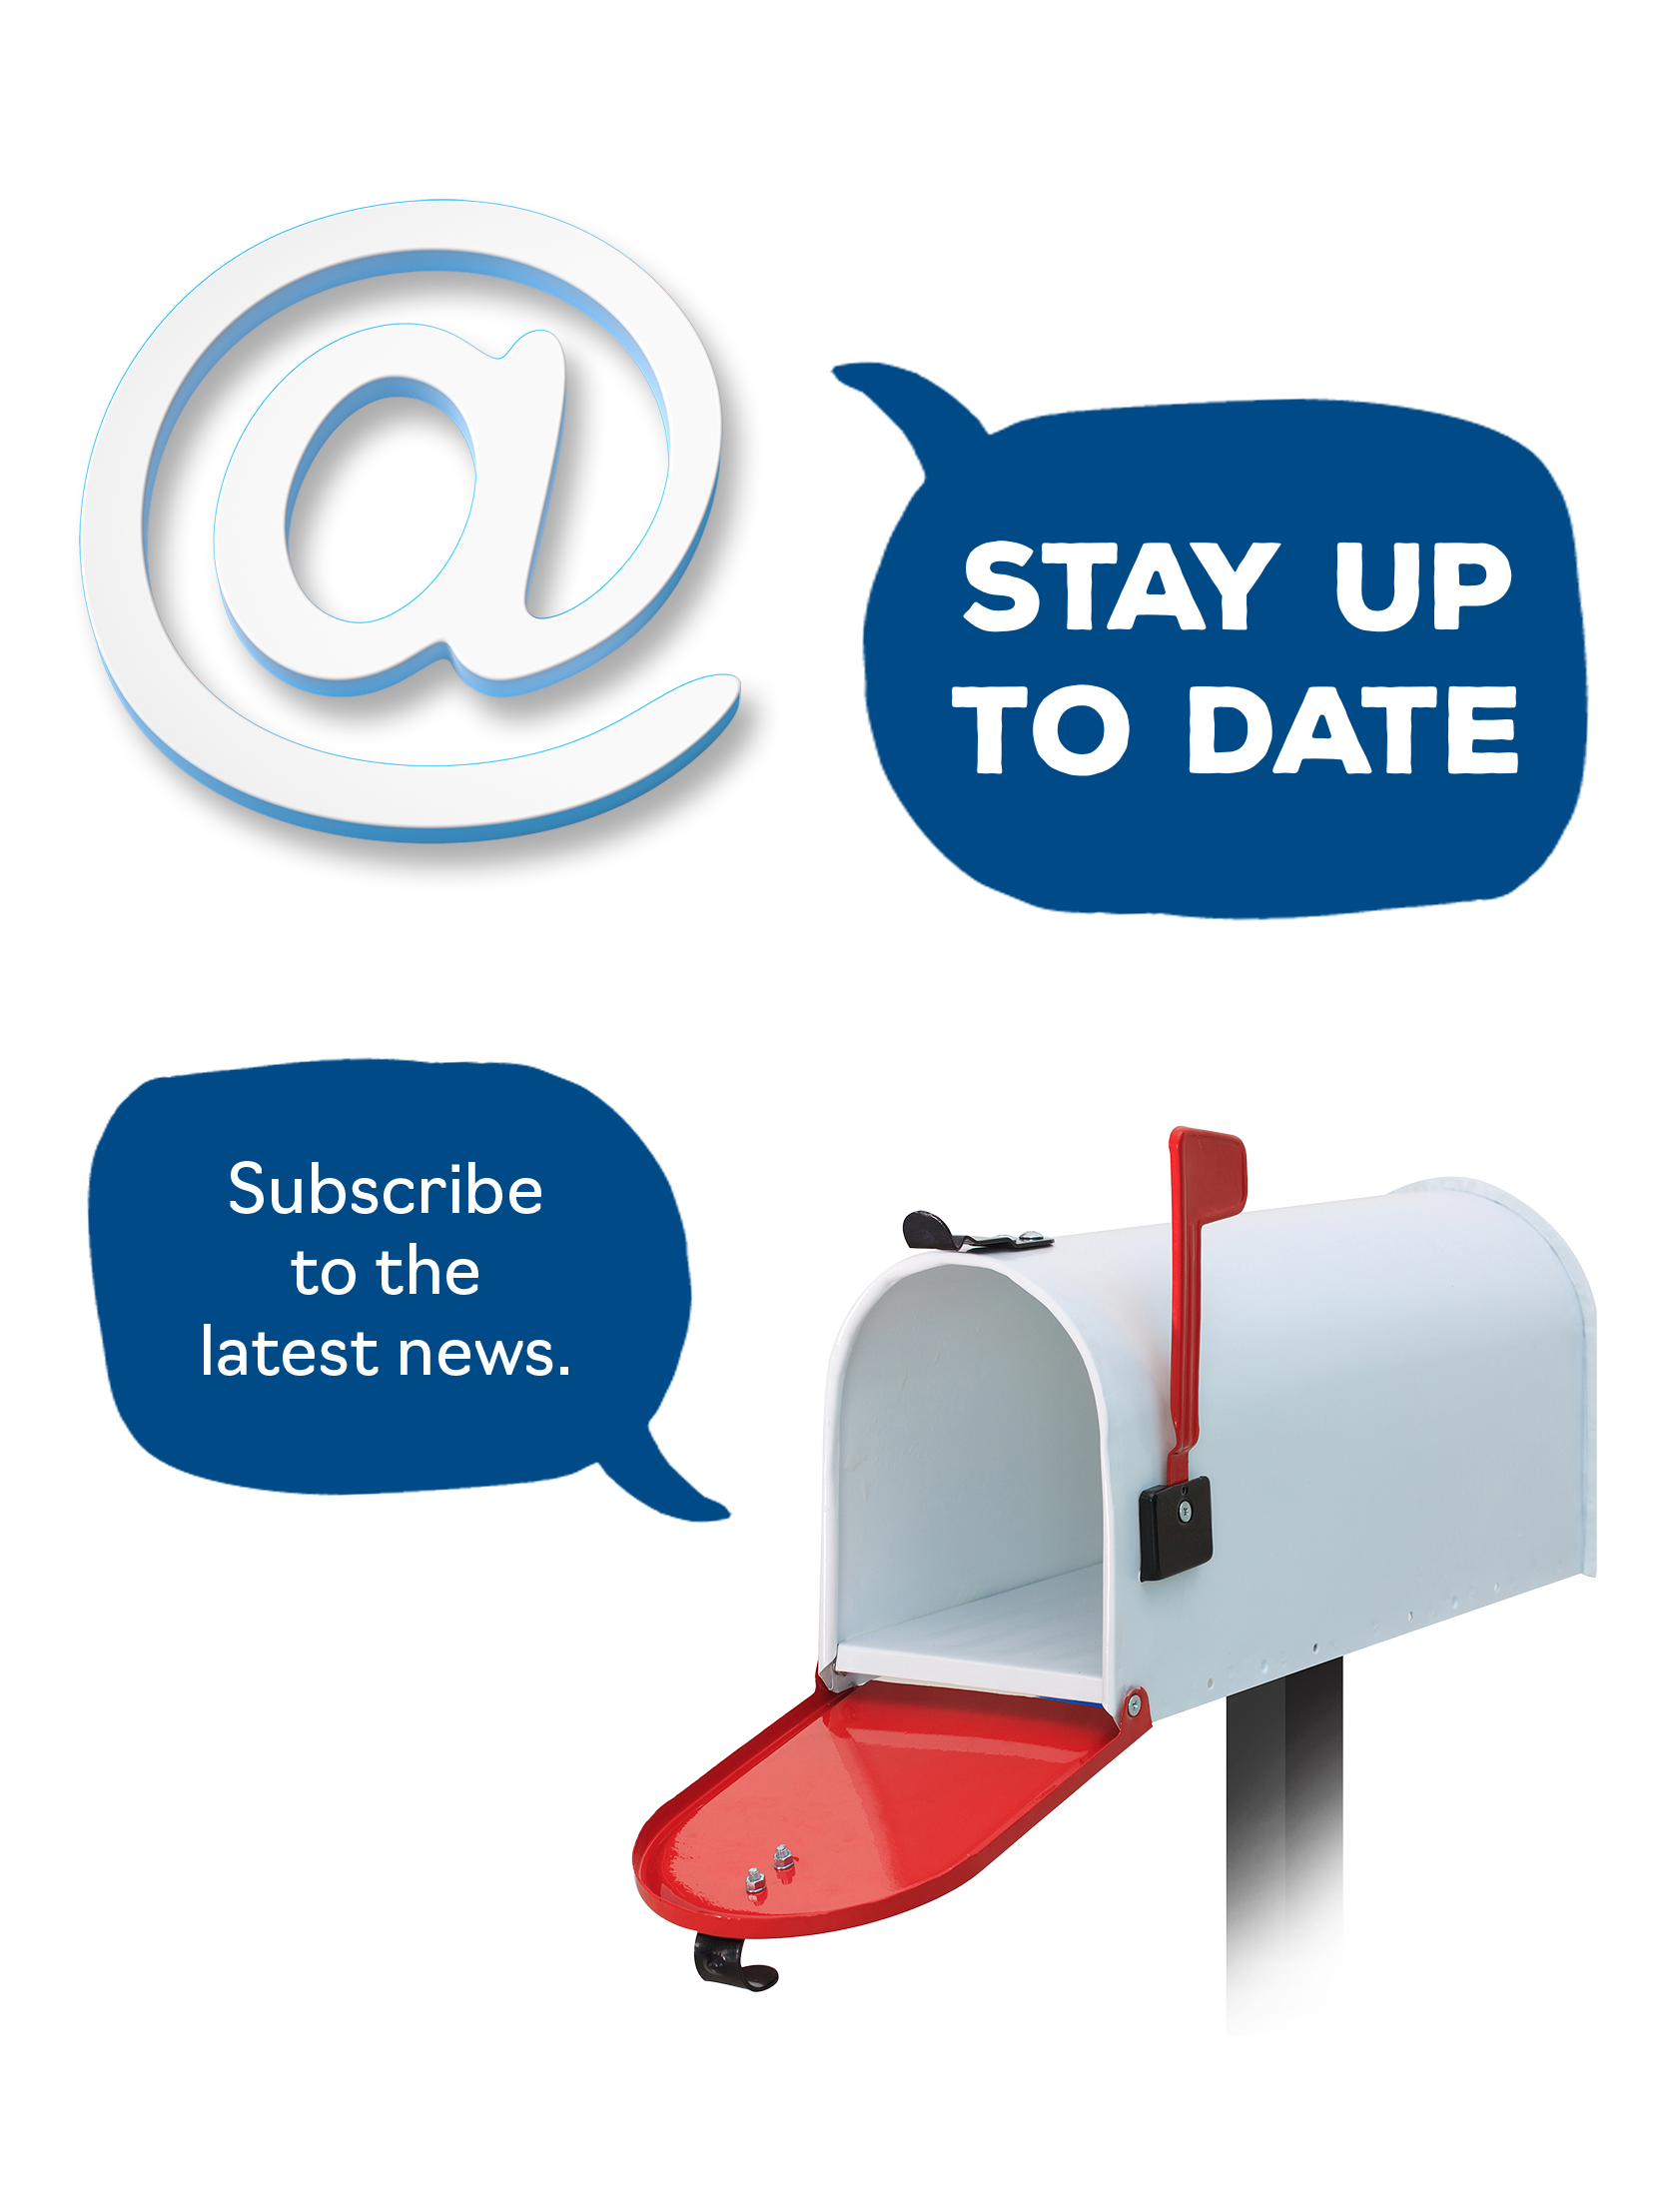 Double Helix email newsletter ad - Stay up to date - Subscribe to the latest news.